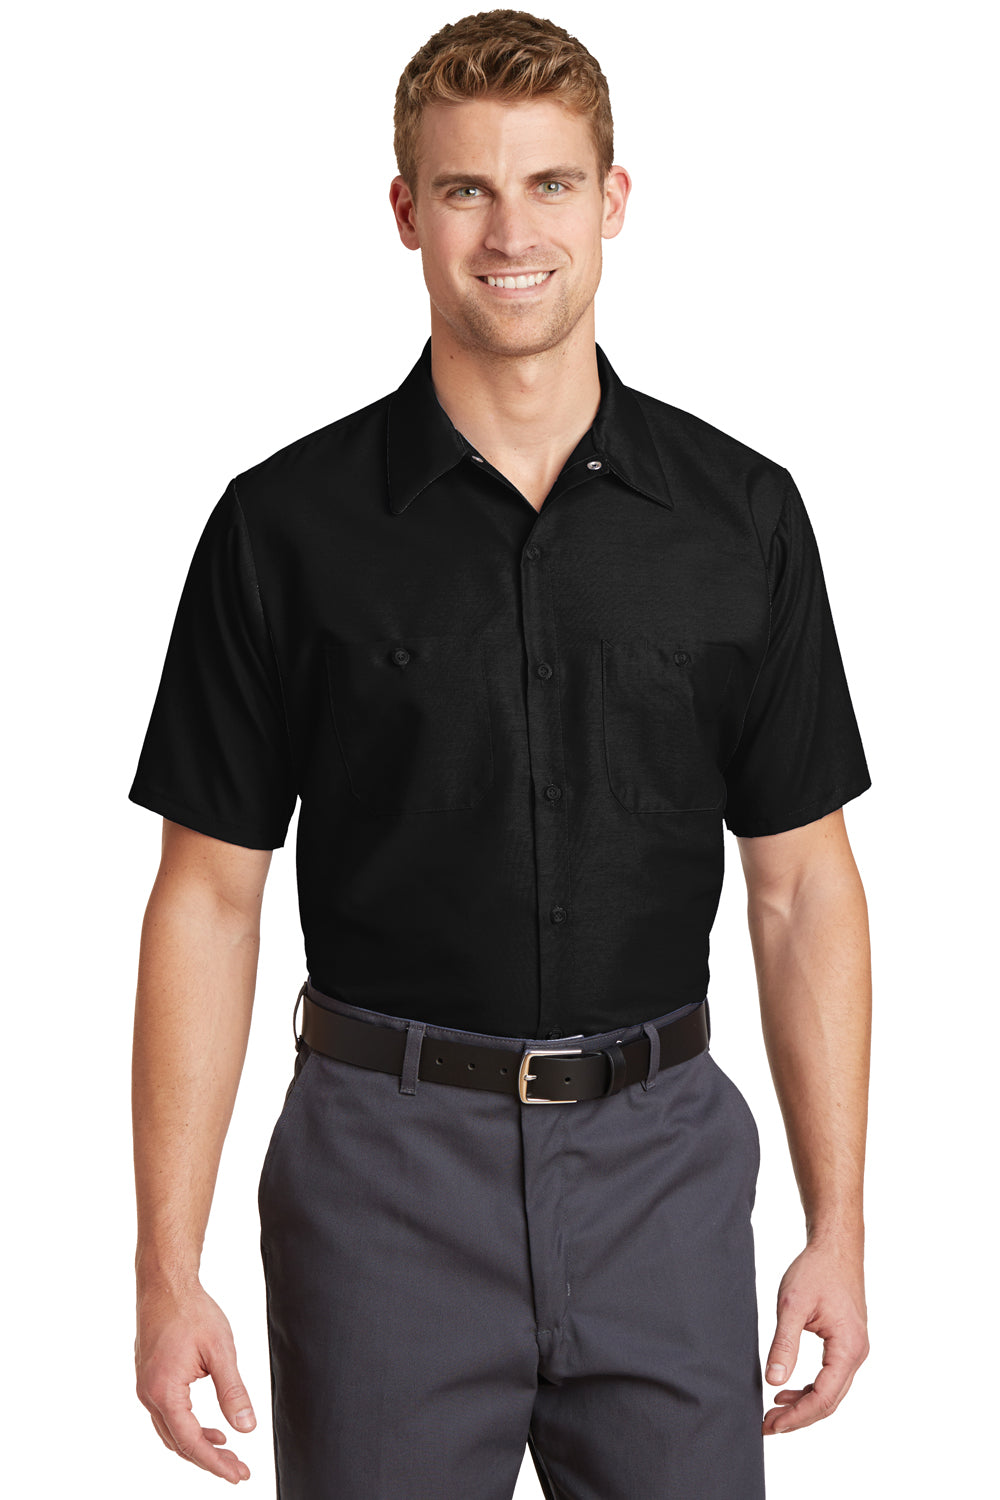 Red Kap SP24 Mens Industrial Moisture Wicking Short Sleeve Button Down Shirt w/ Double Pockets Black Front